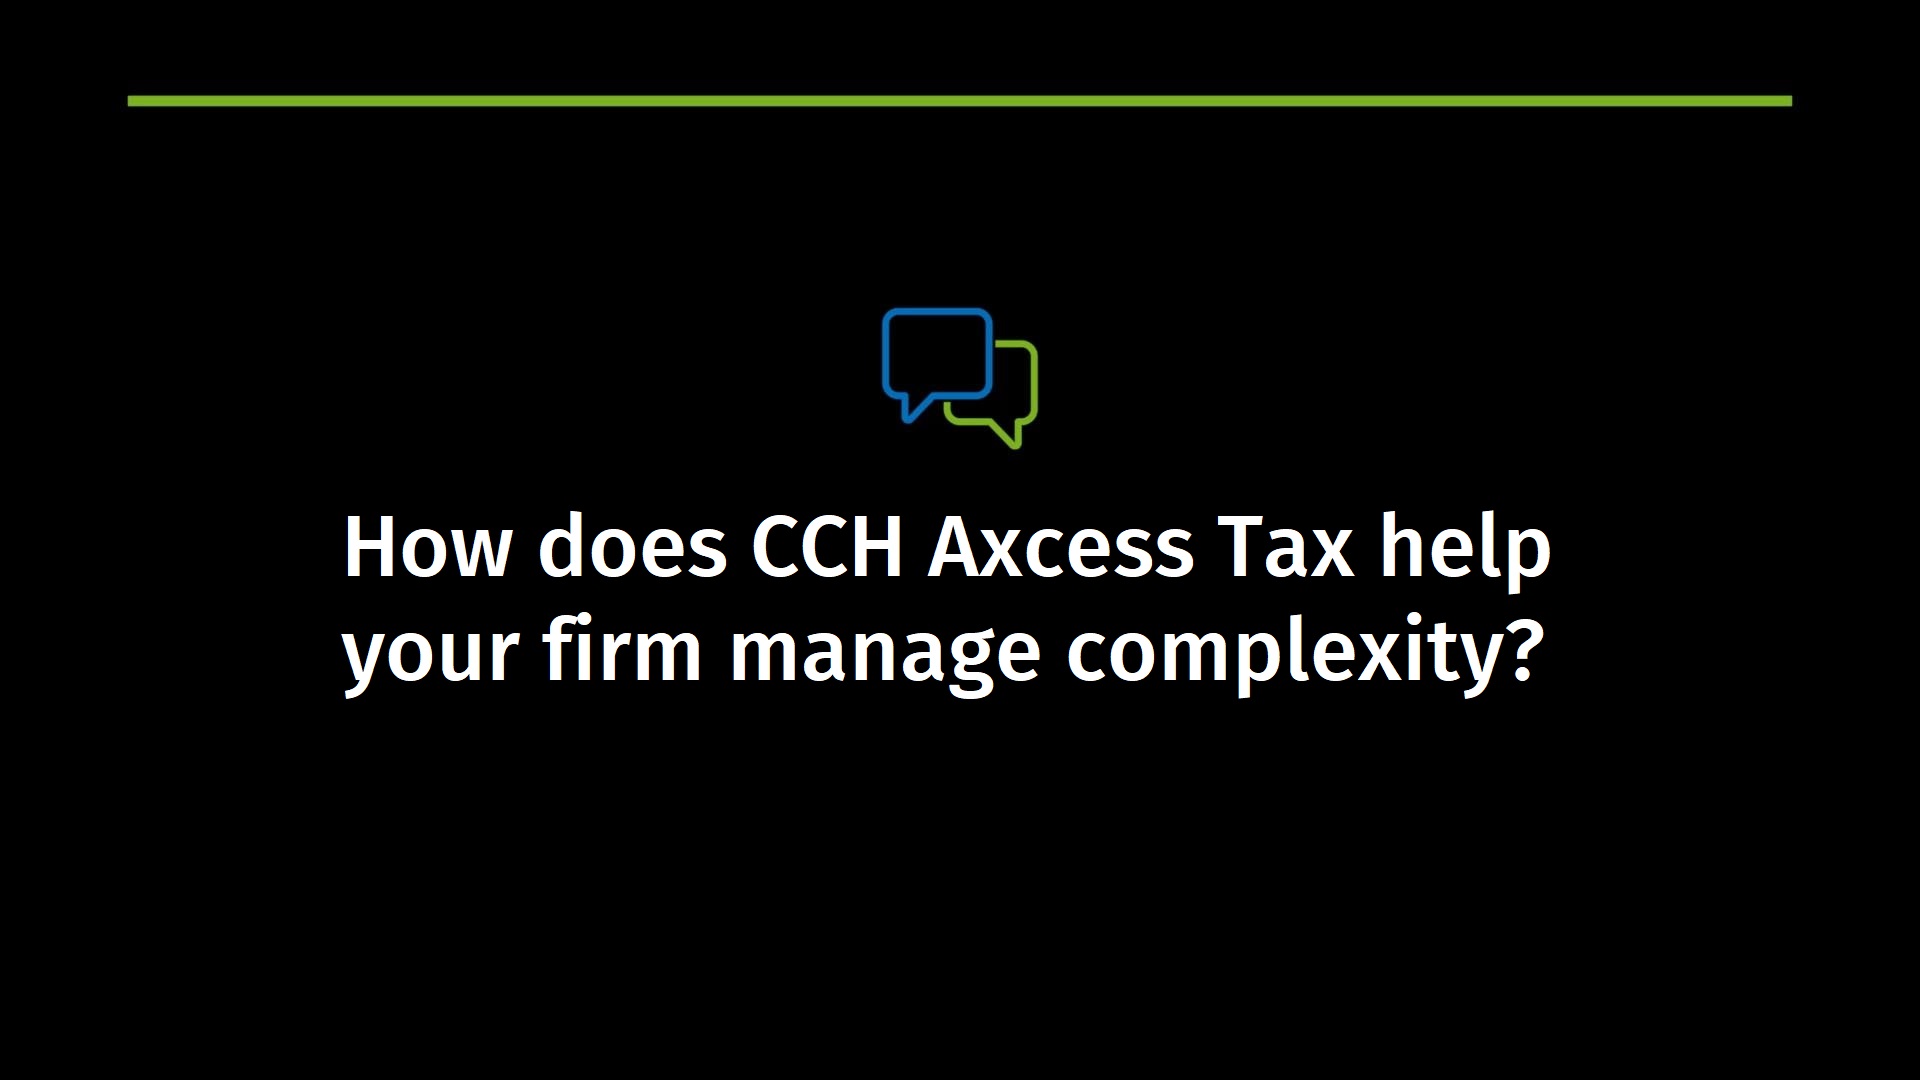 How does CCH Axcess Tax help your firm manage complexity?